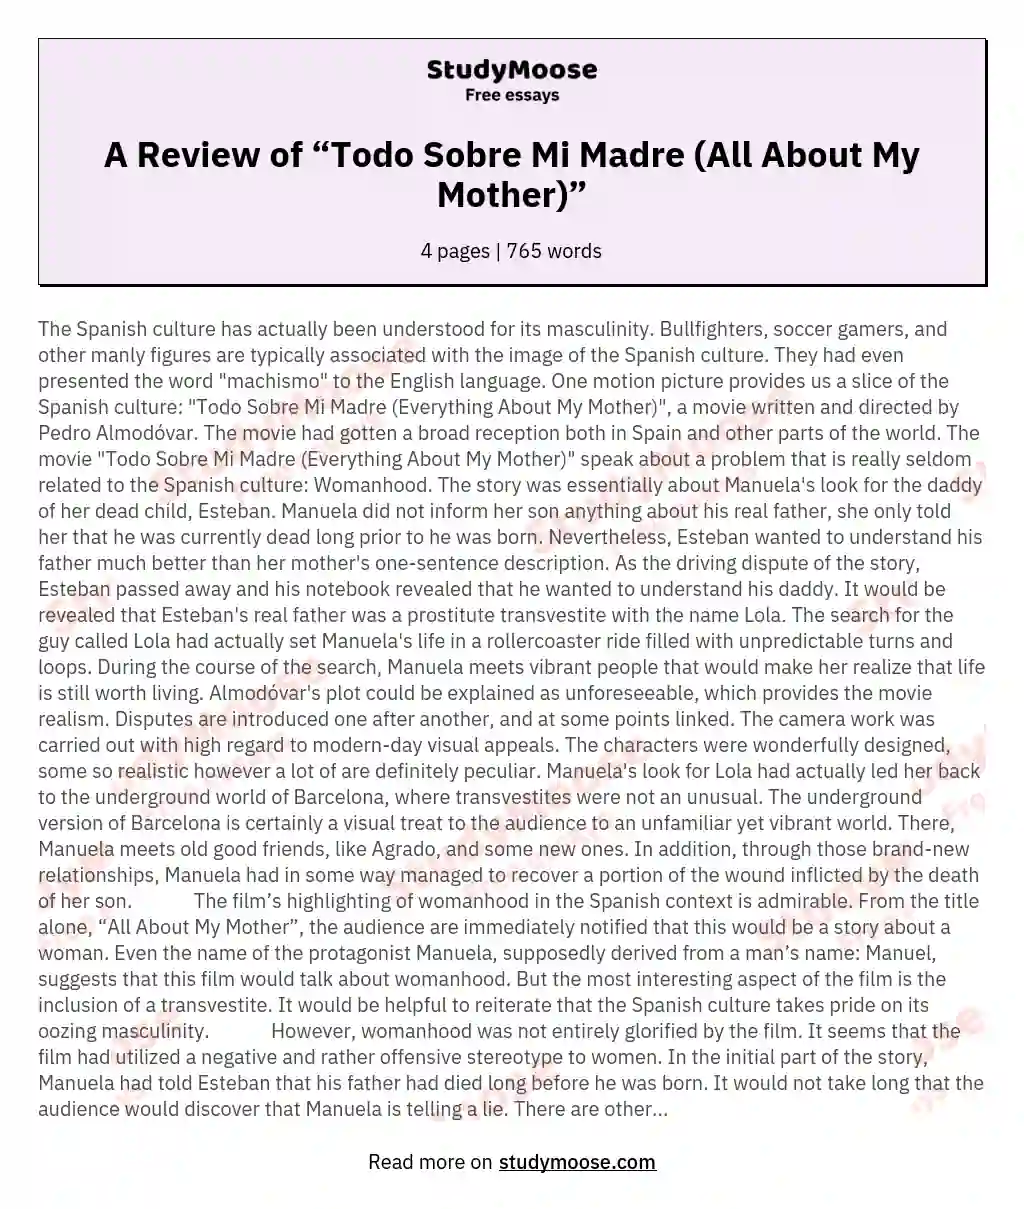 A Review of “Todo Sobre Mi Madre (All About My Mother)” essay